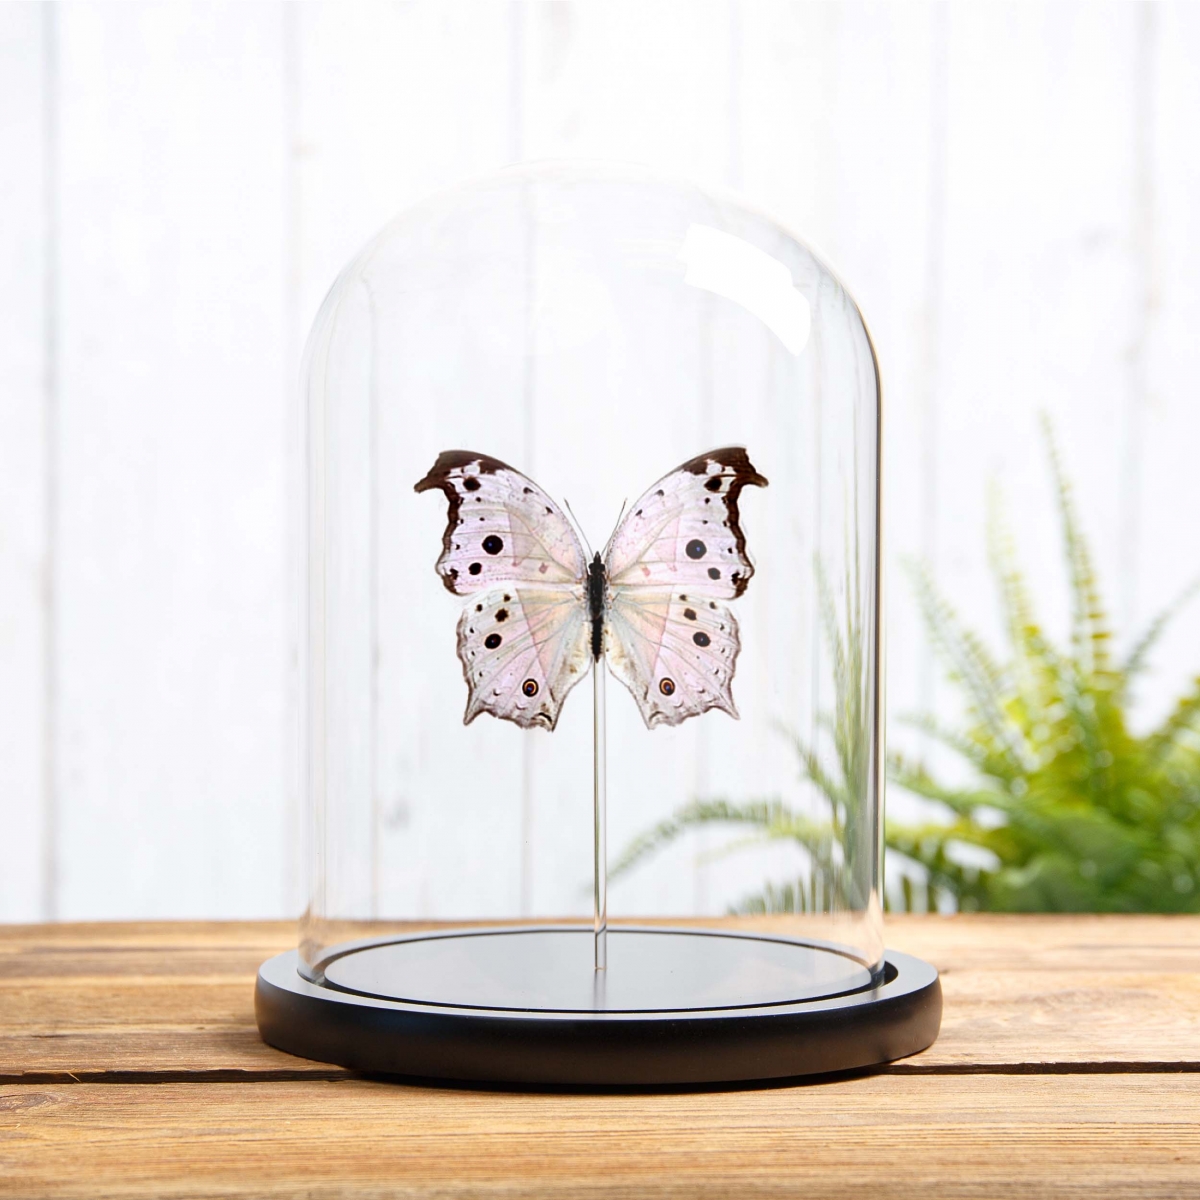 Minibeast Forest Mother-Of-Pearl Butterfly in Glass Dome with Wooden Base (Salamis parhassus)